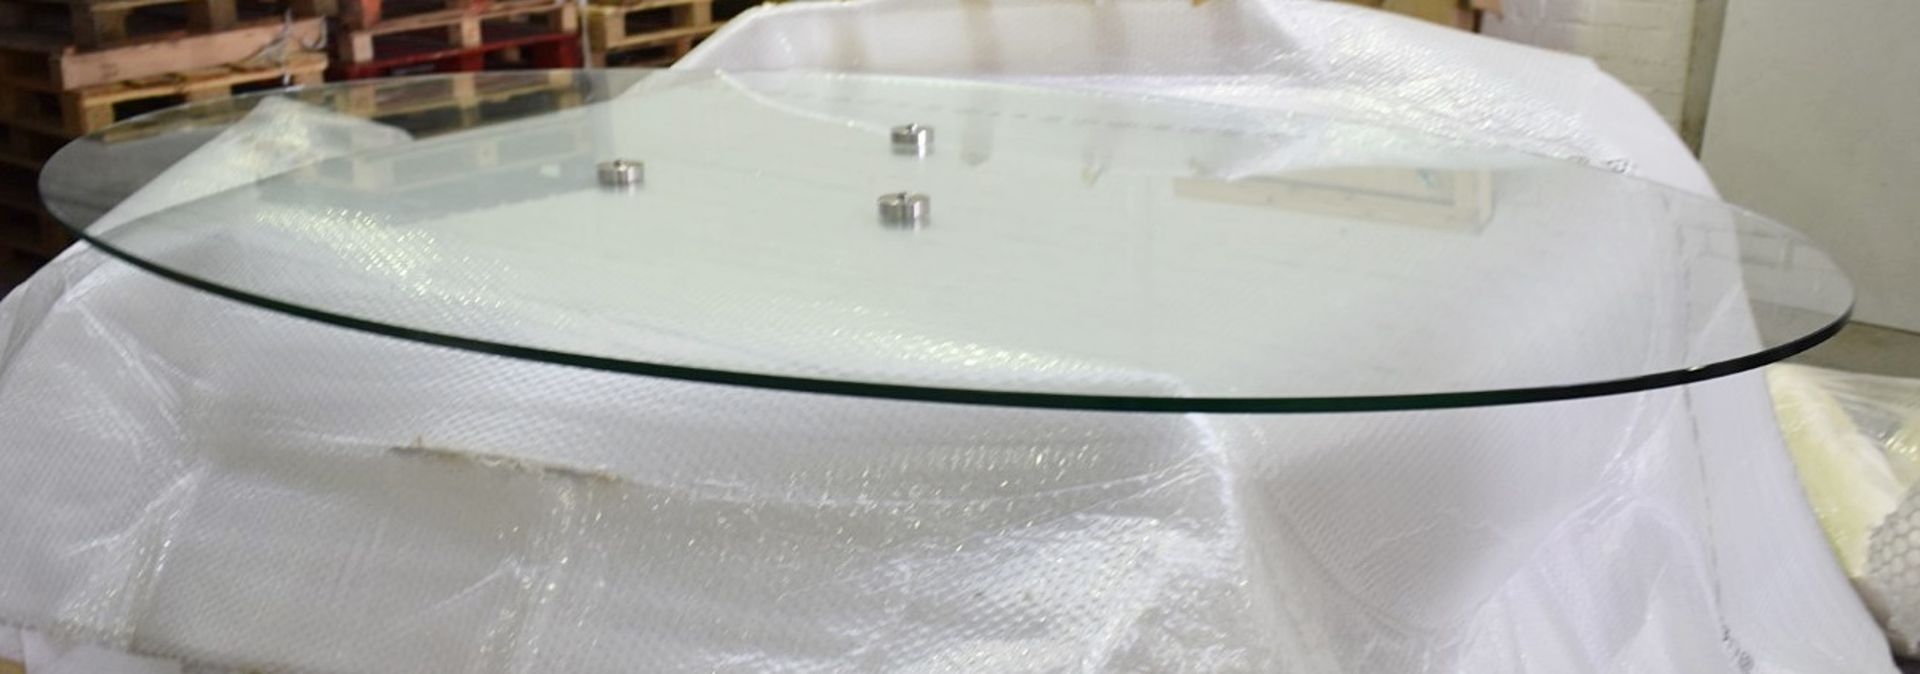 1 x PORADA 'Infinity' Oval 12mm Thick Transparent Tempered Designer Glass Table Top (No Base) - Image 5 of 9